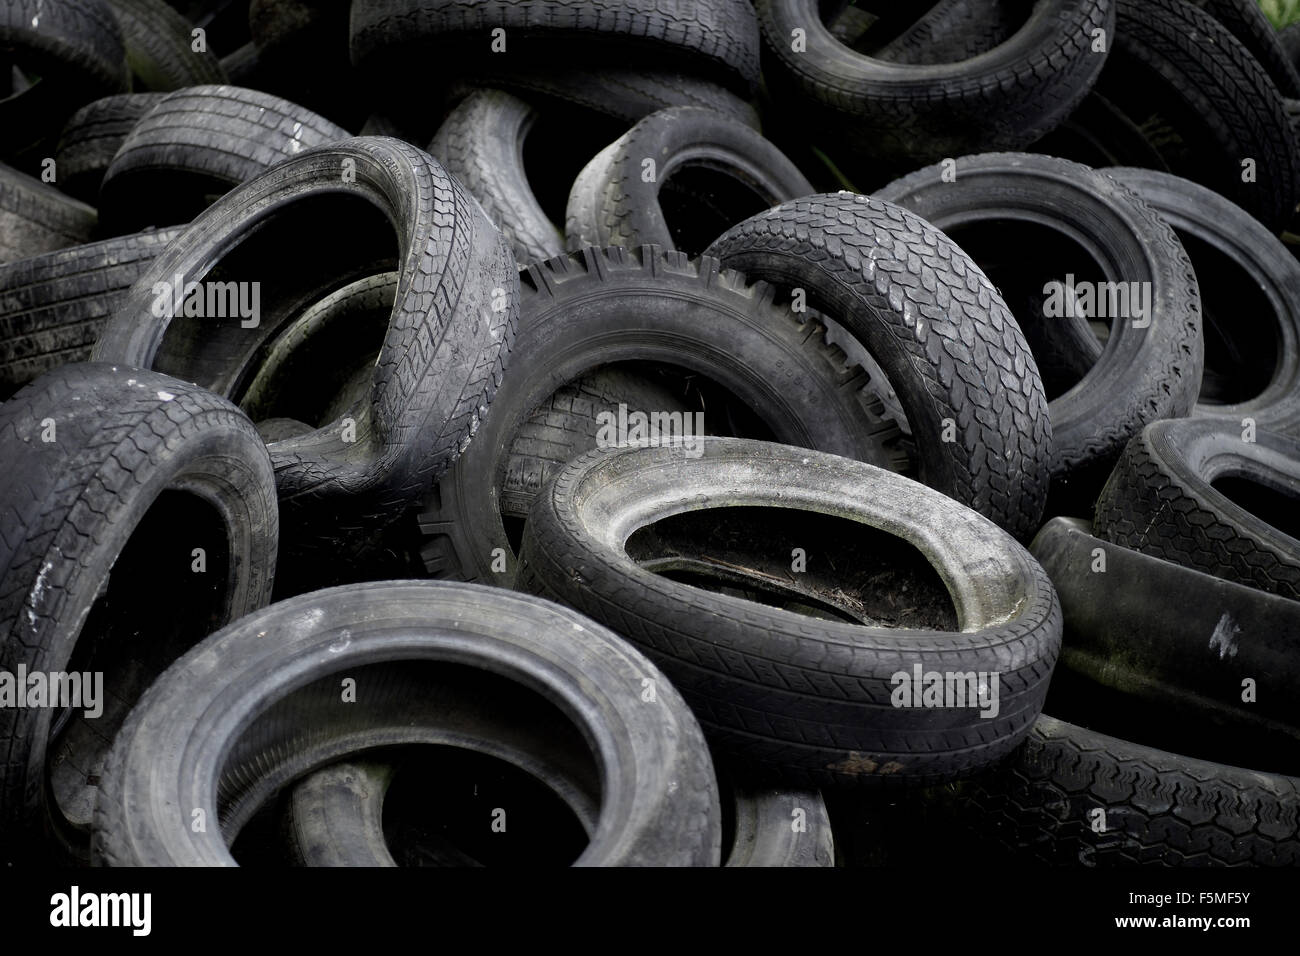 Pile of used tyres Stock Photo